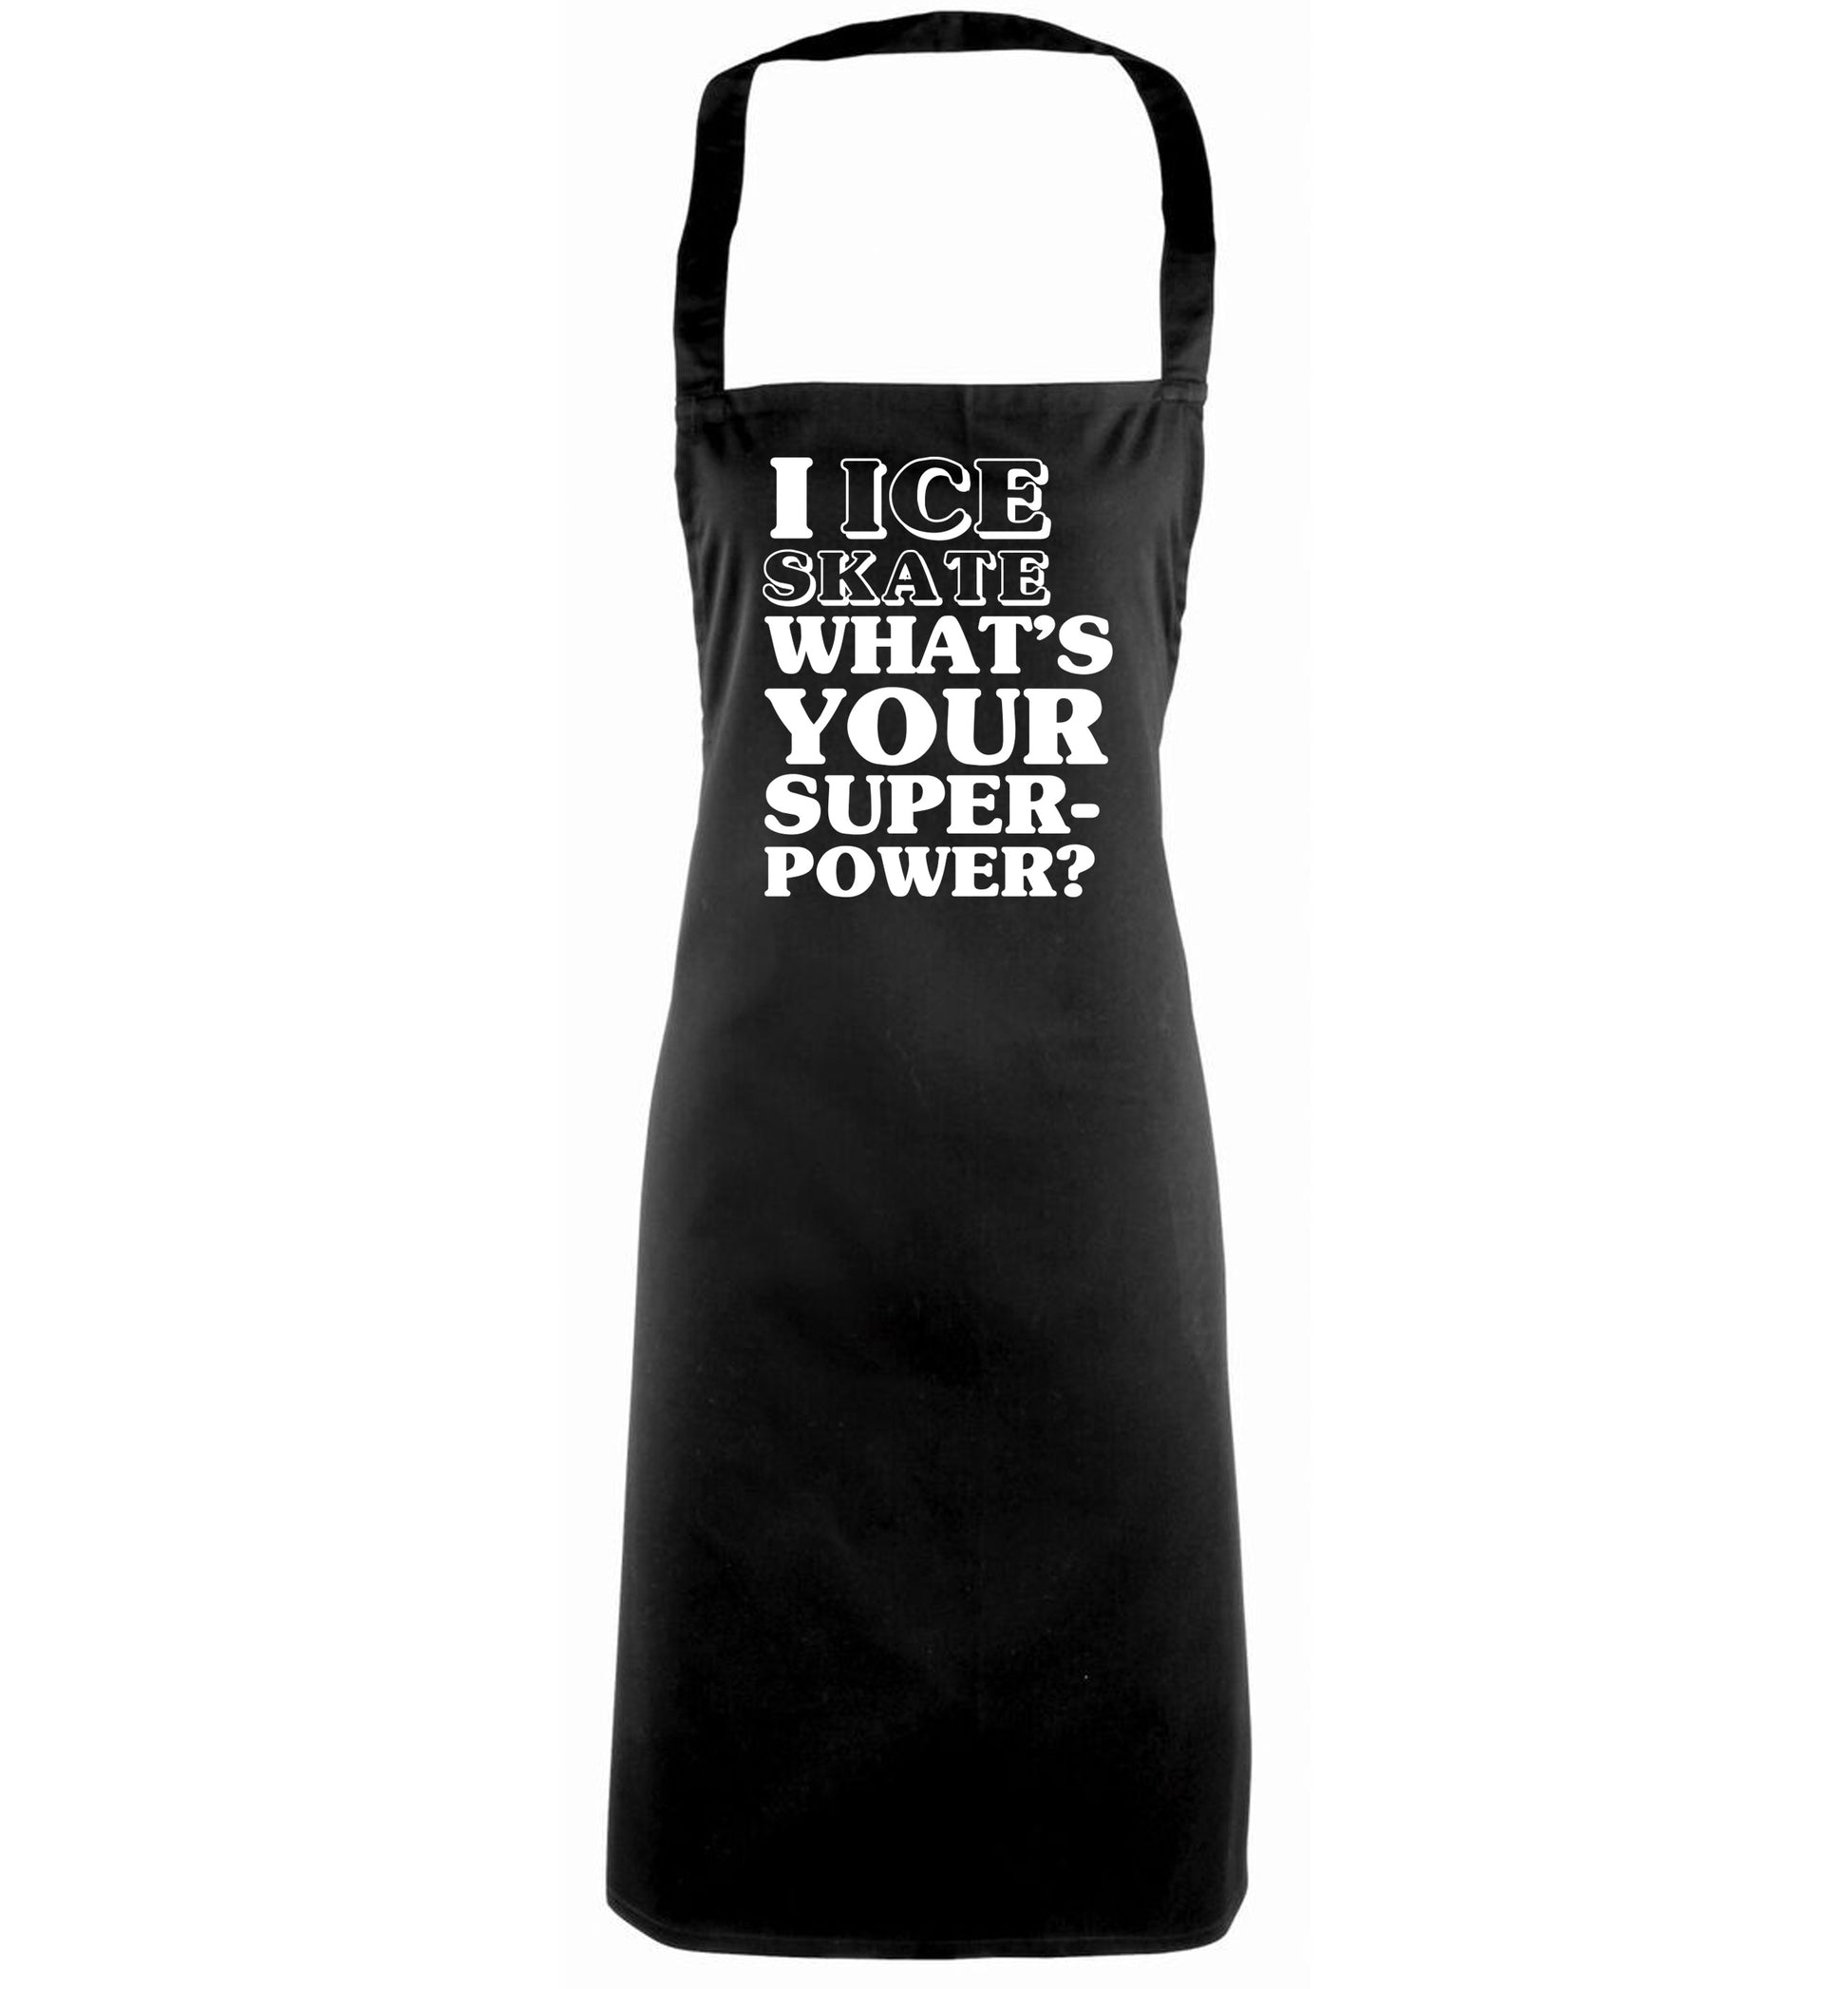 I ice skate what's your superpower? black apron